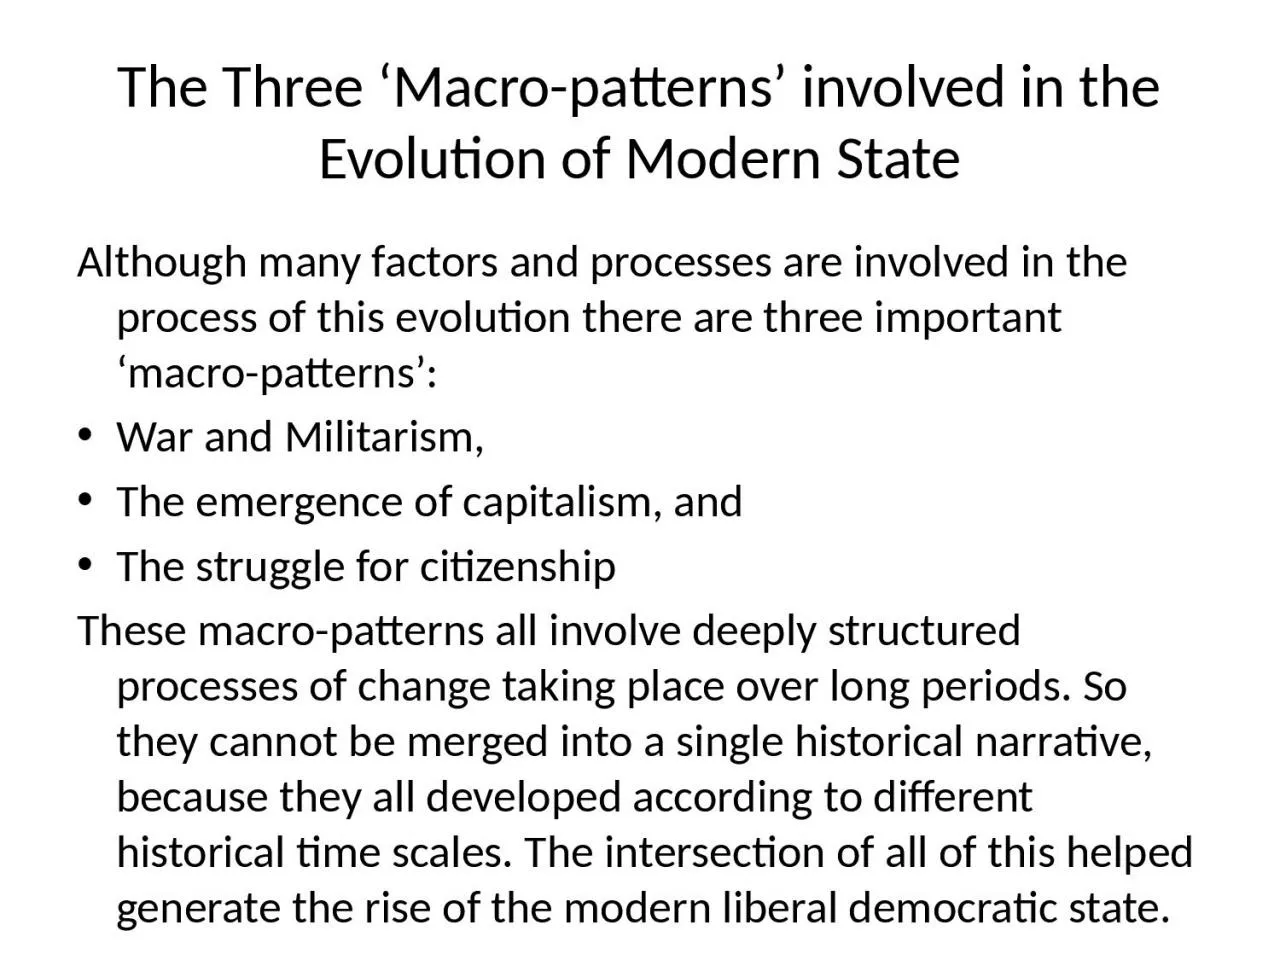 The Three ‘Macro-patterns’ involved in the Evolution of Modern State